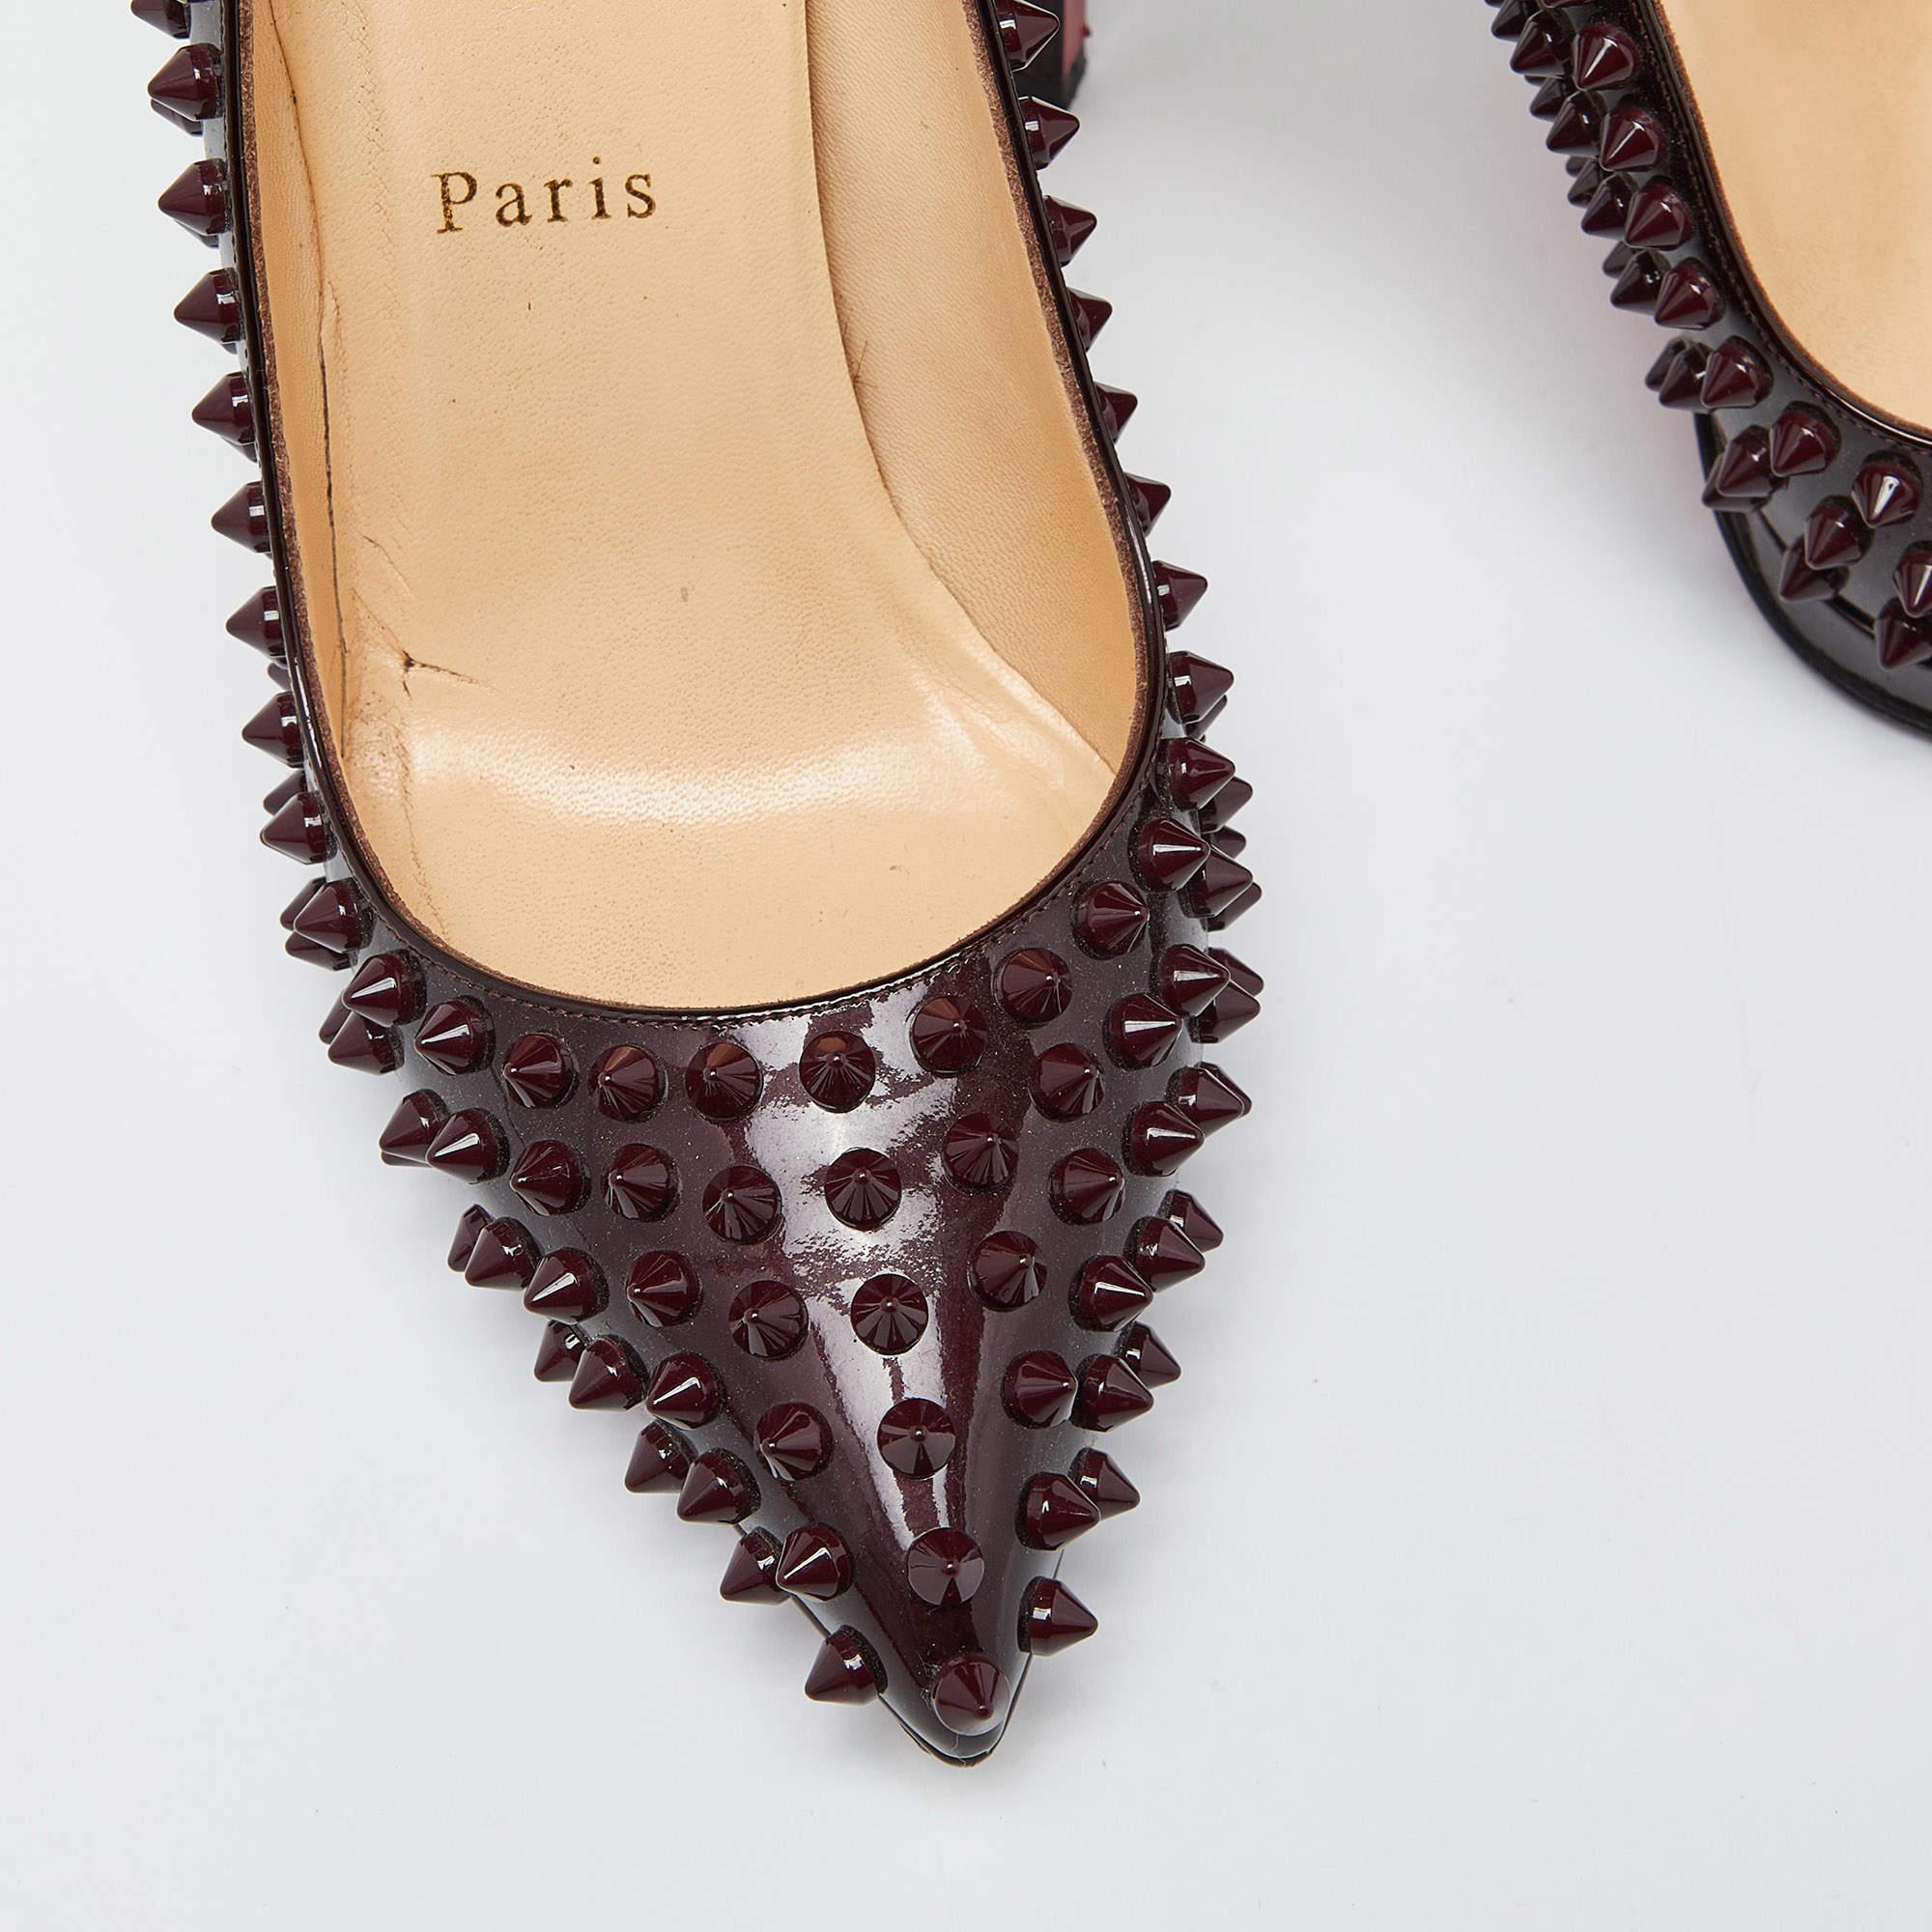 Christian Louboutin Burgundy Patent Leather Pigalle Spikes Pumps Size 37 In Good Condition For Sale In Dubai, Al Qouz 2